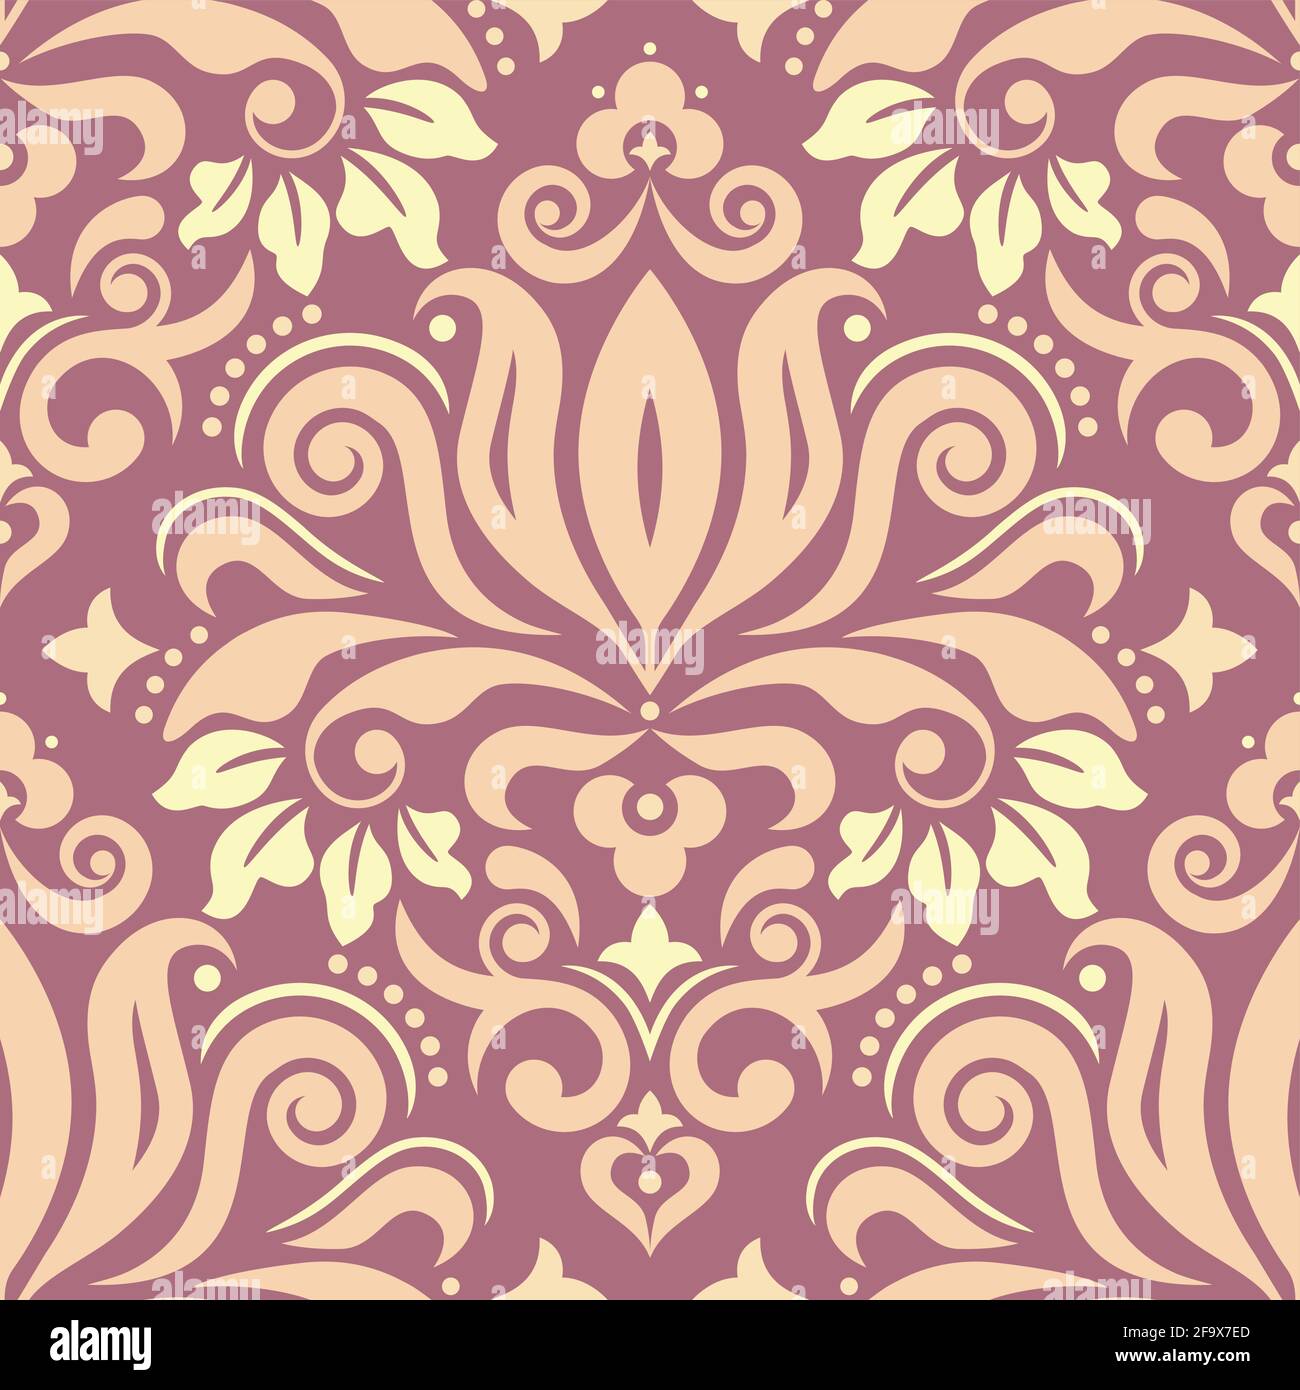 Royal Damask wallpaper of fabric print pattern, retro textile vector design with flowers, leaves and swirls Stock Vector